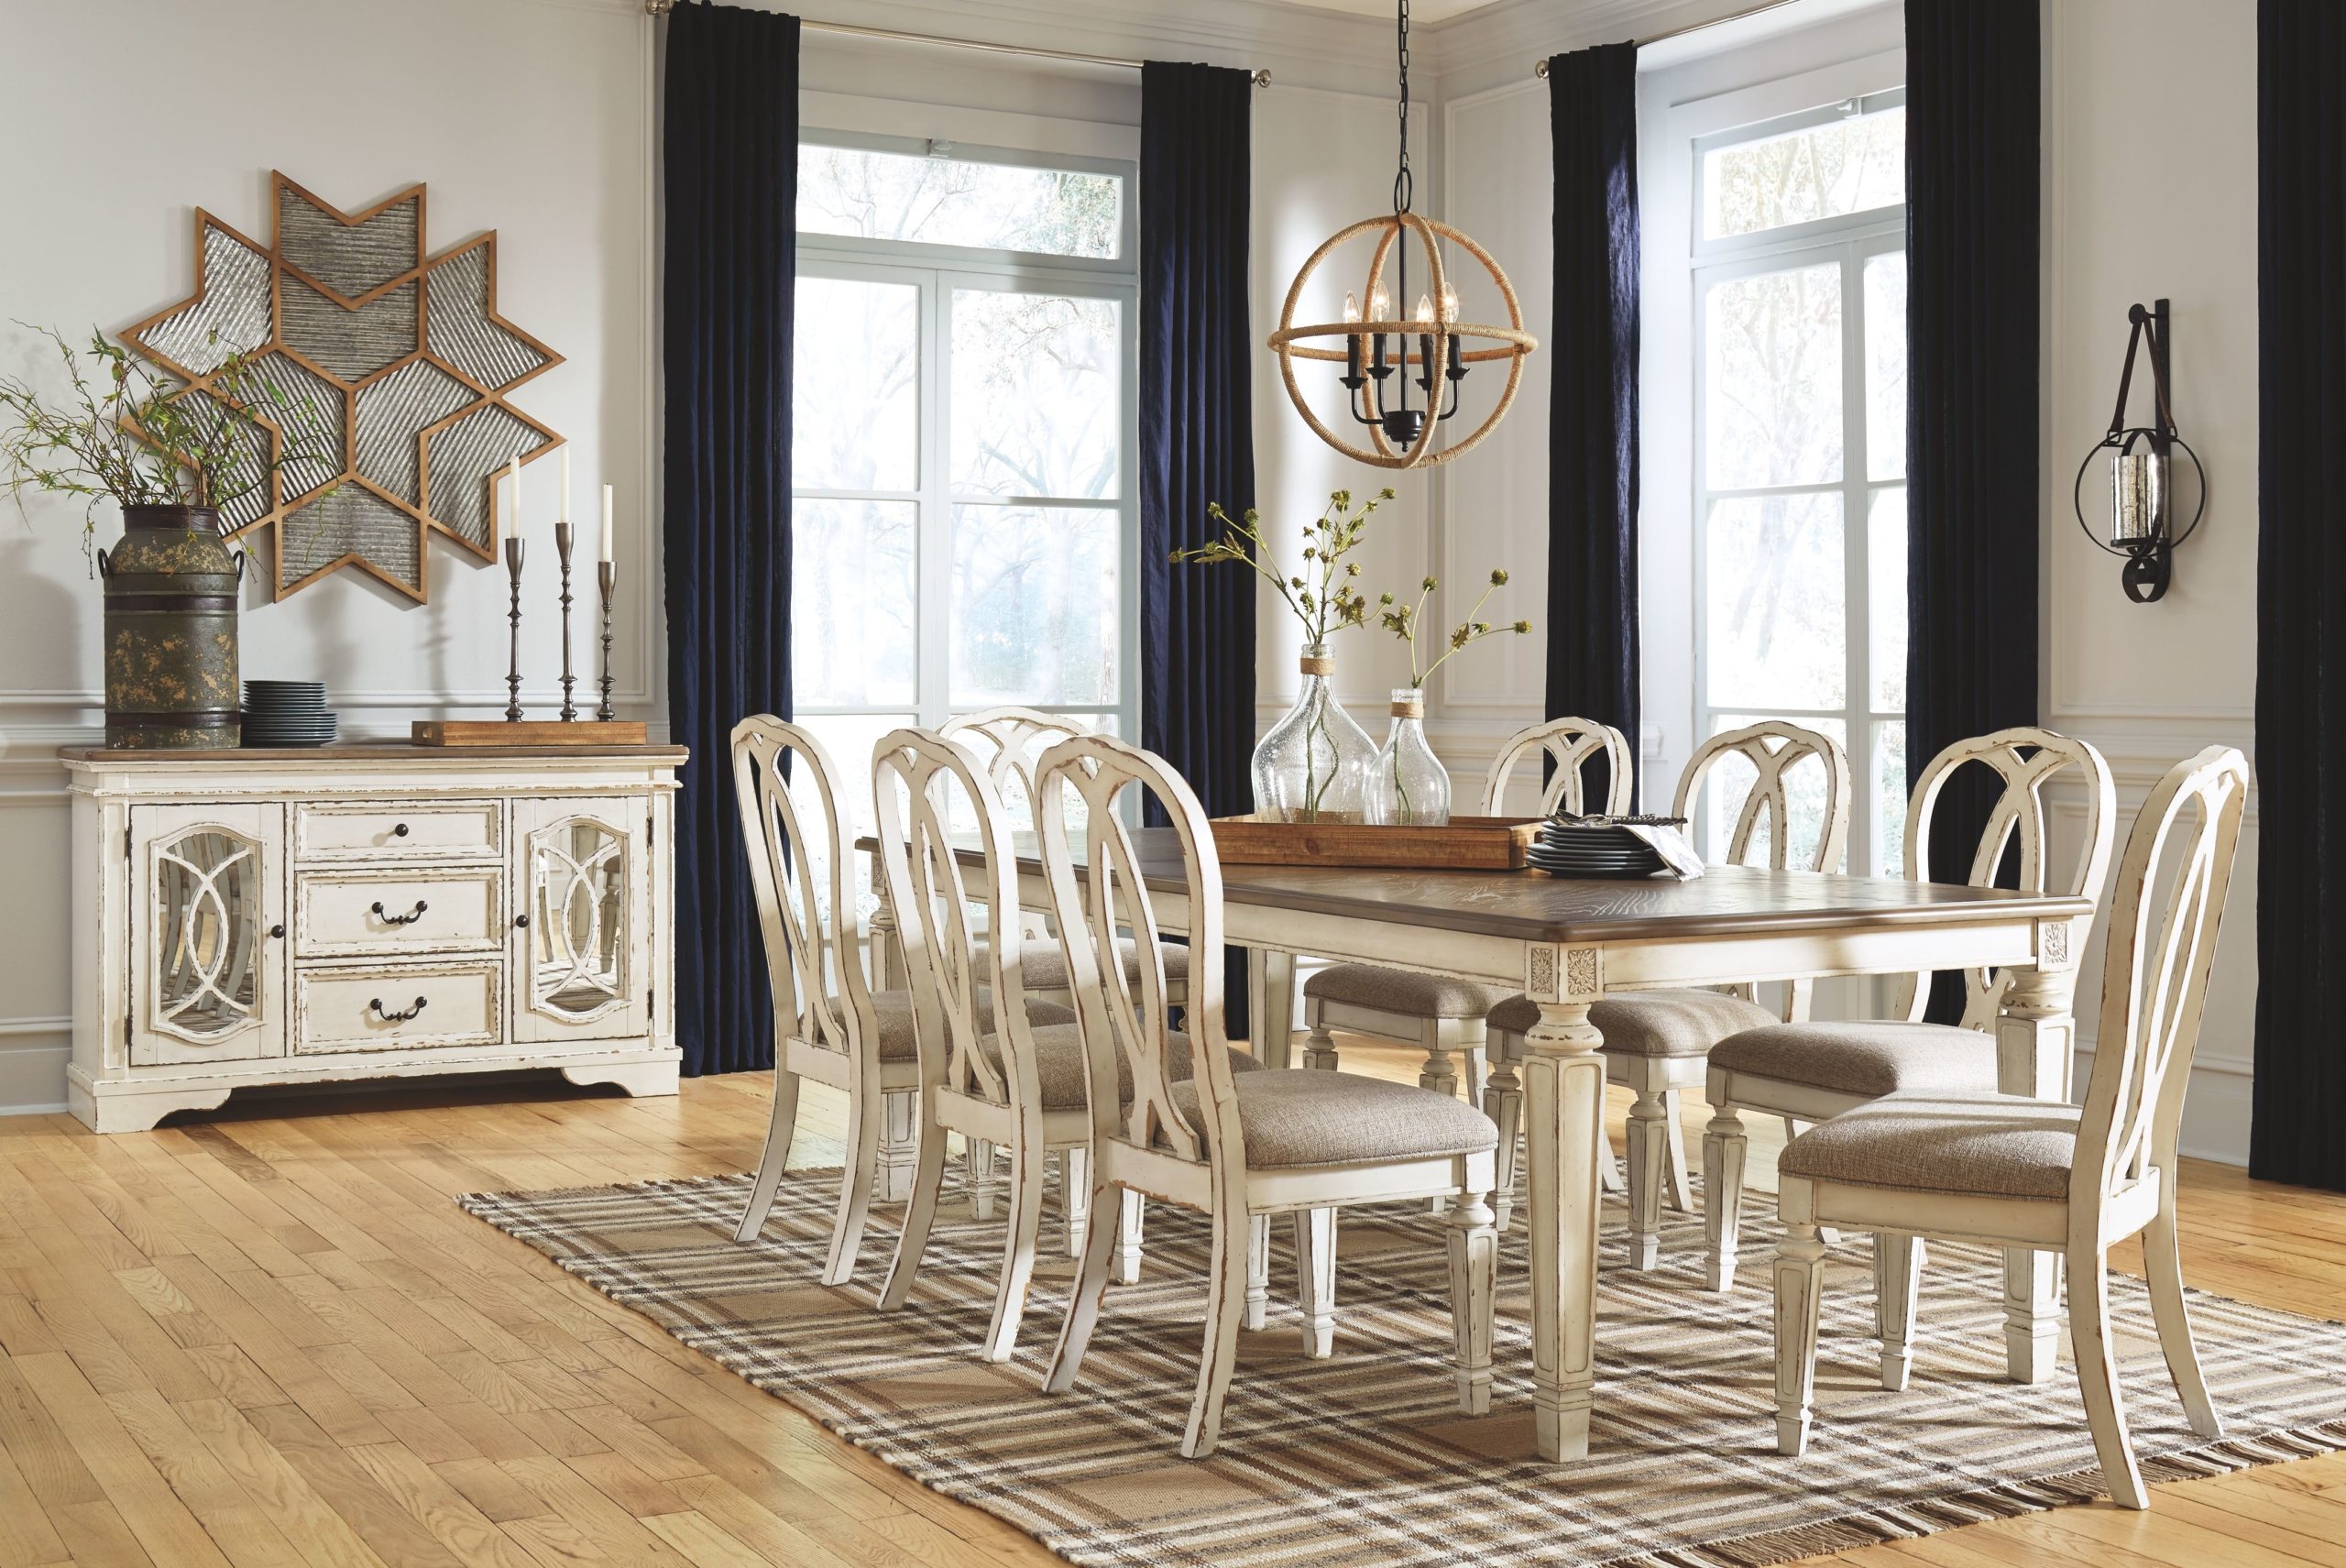 Bloomingdales Dining Room Set White Chairs